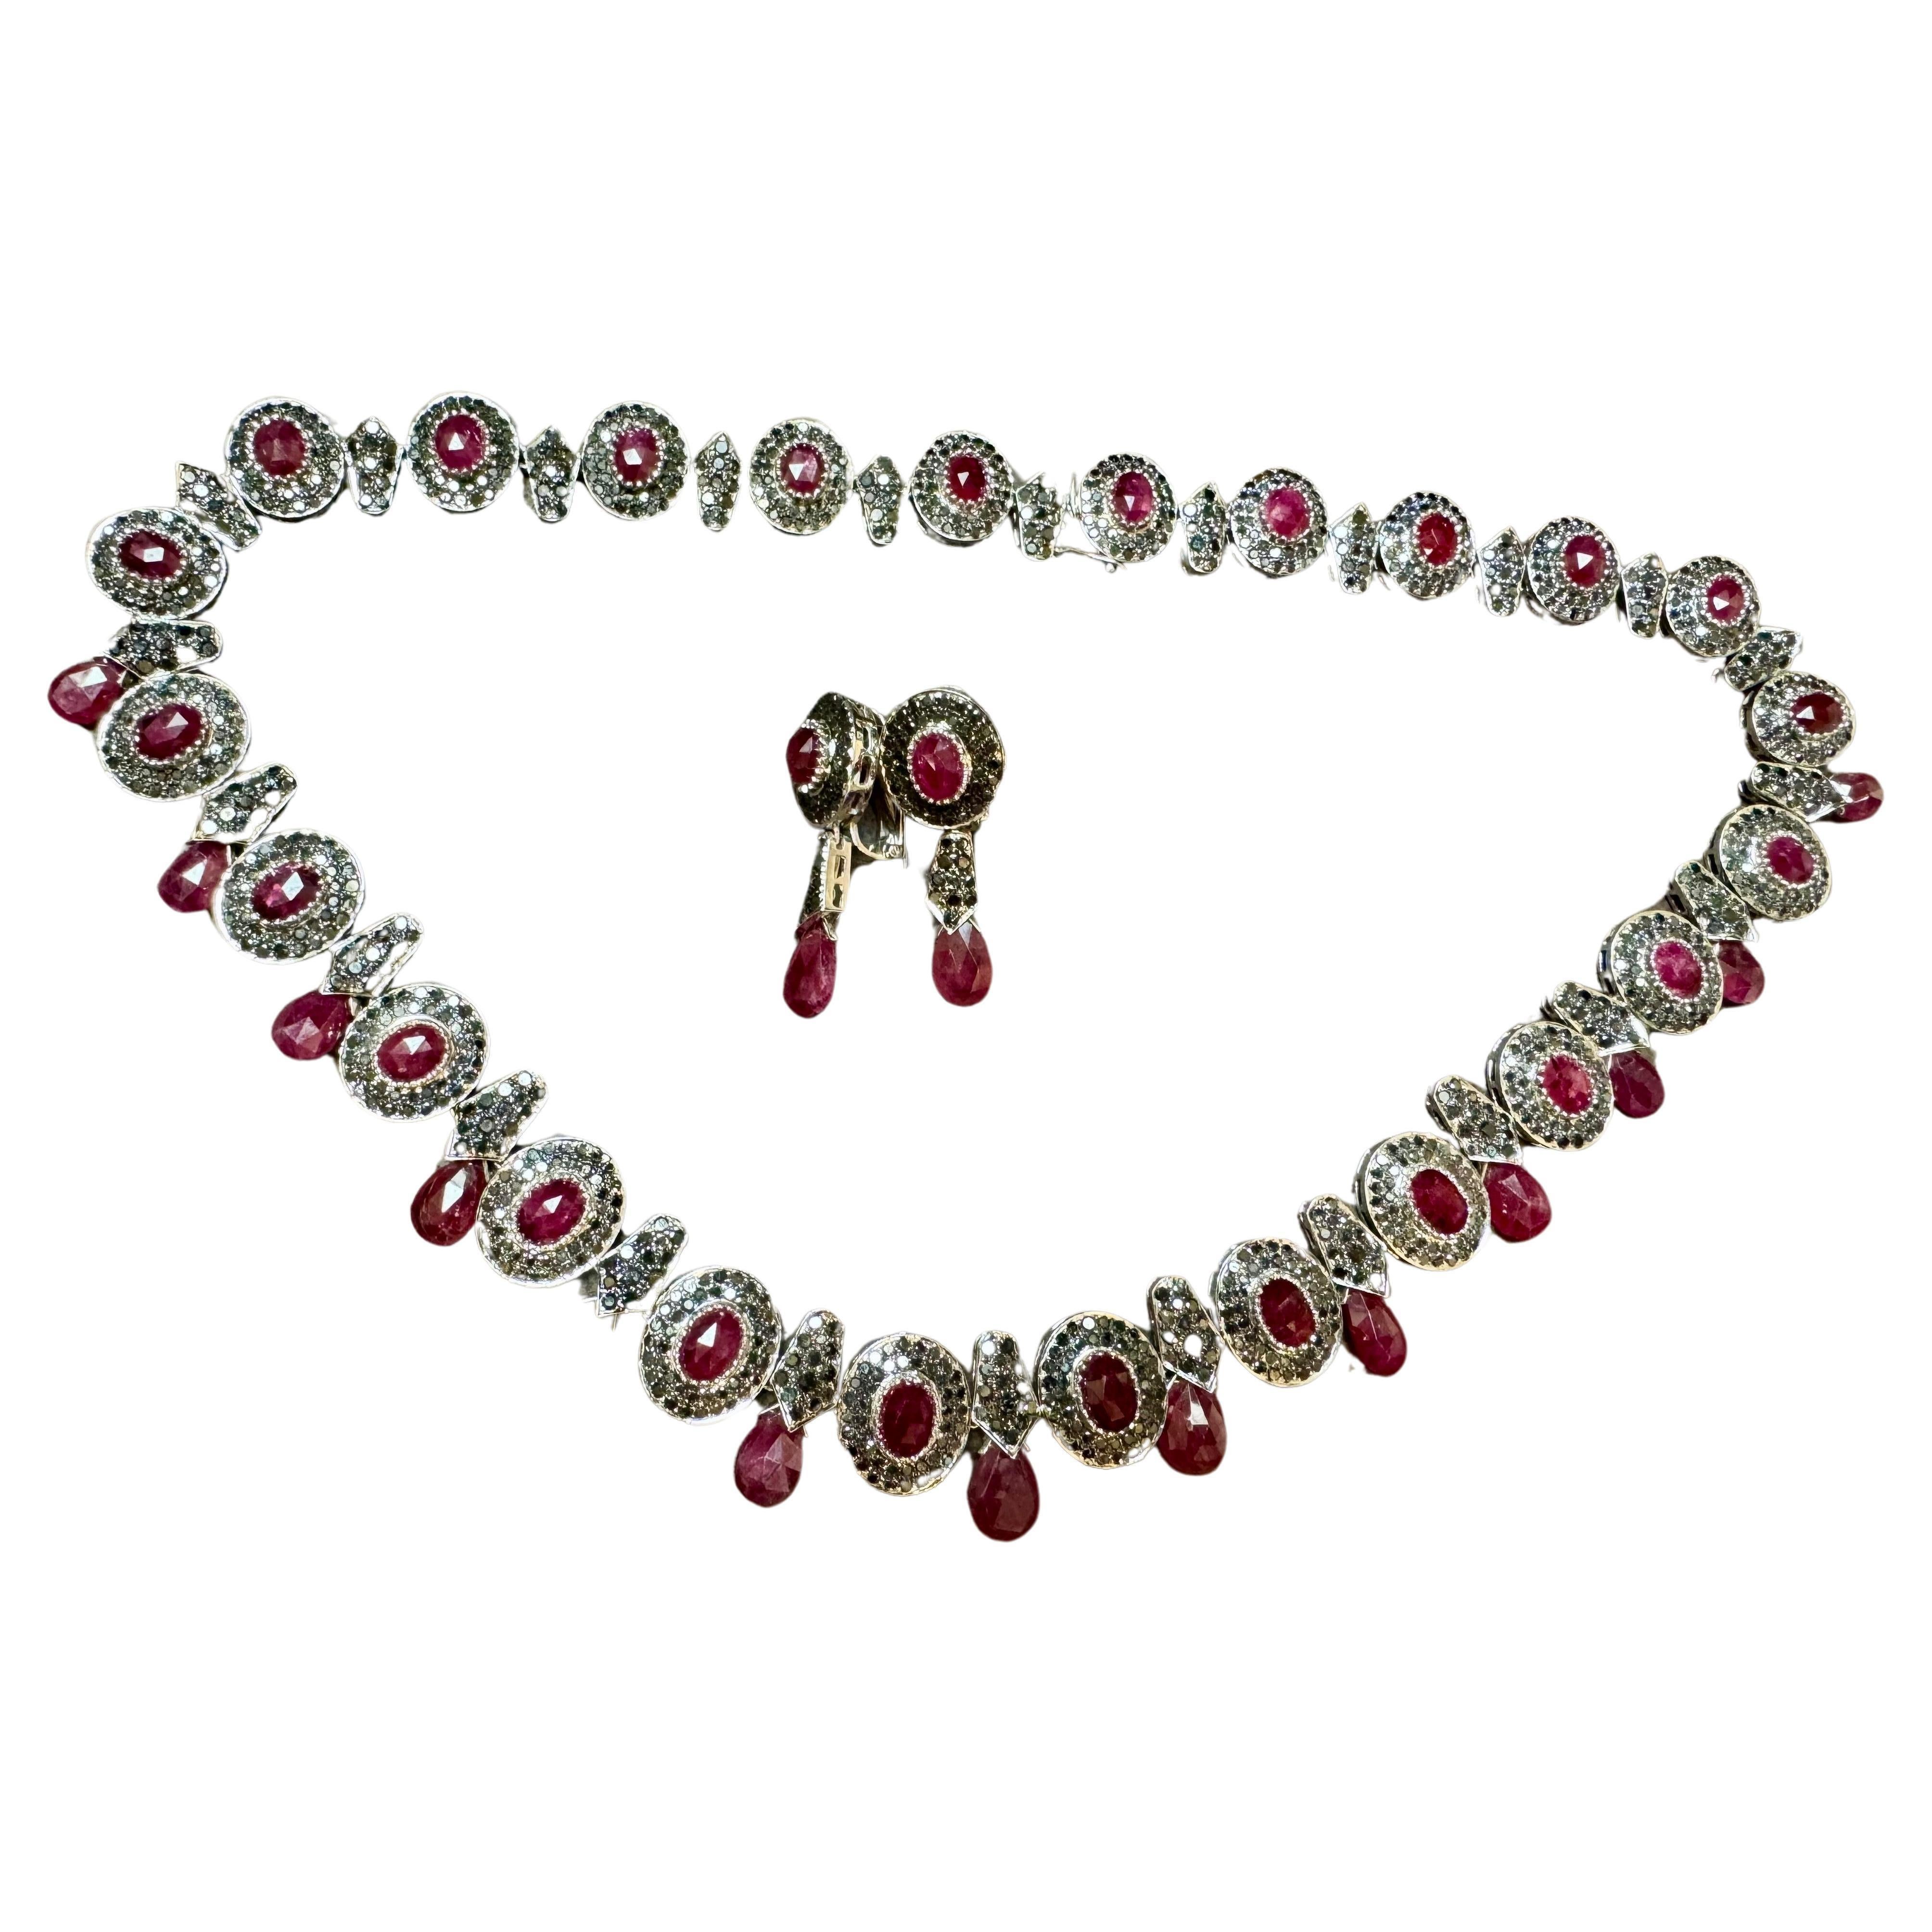  Necklace & Earring Suite 35 Ct Natural Ruby No Heat & Black & White Diamond 18KWG
This Large eye catching Collar Necklace with matching earrings are  crafted from 18 Karat gold and features Oval-shaped  natural Rubies, and ruby drops, totaling